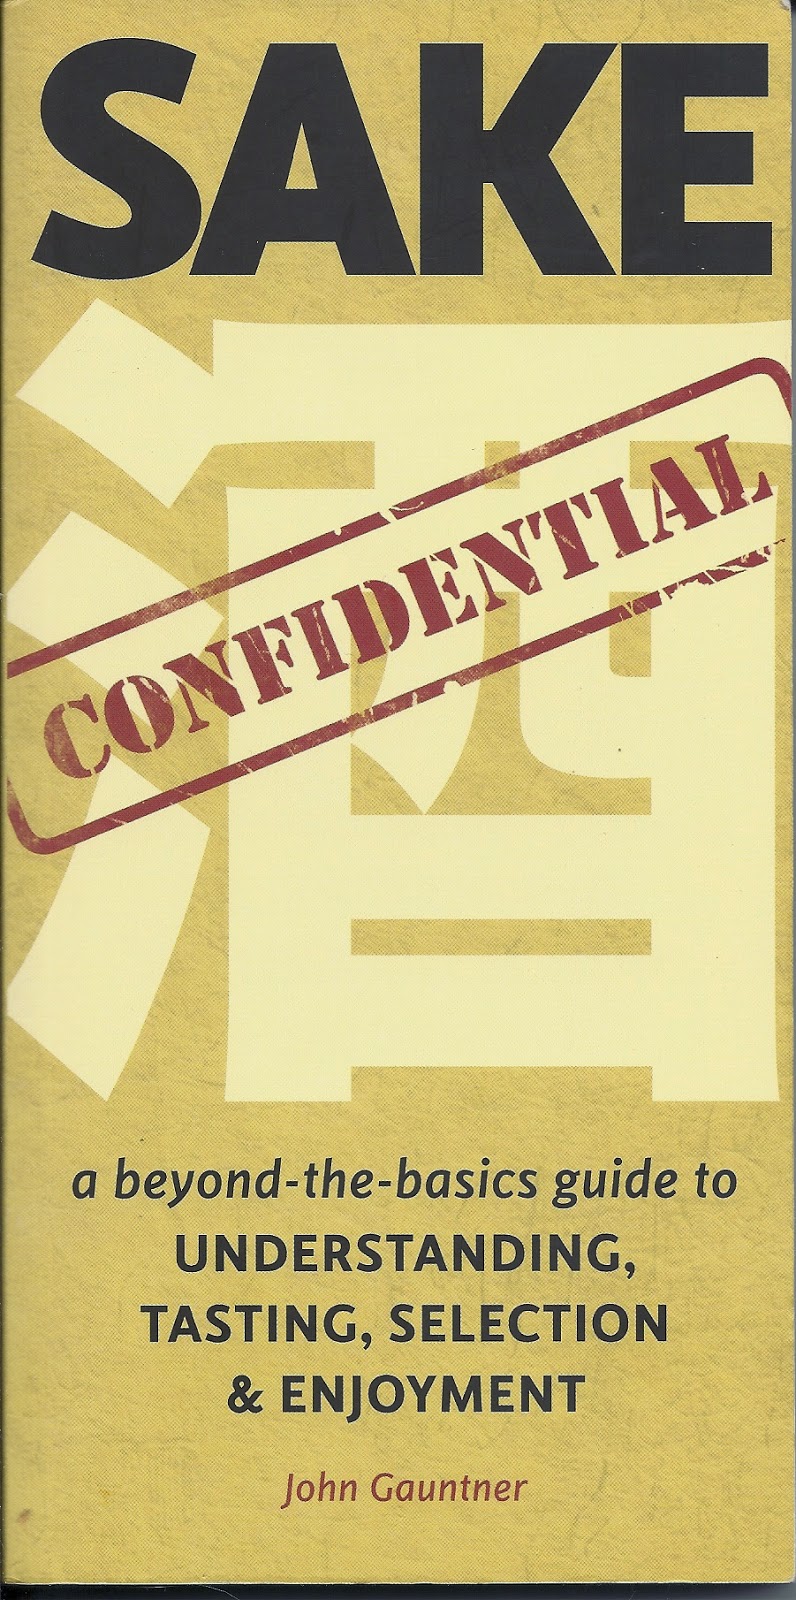 Sake Confidential is certainly worth picking up if you have any curiosity about the world of sake.